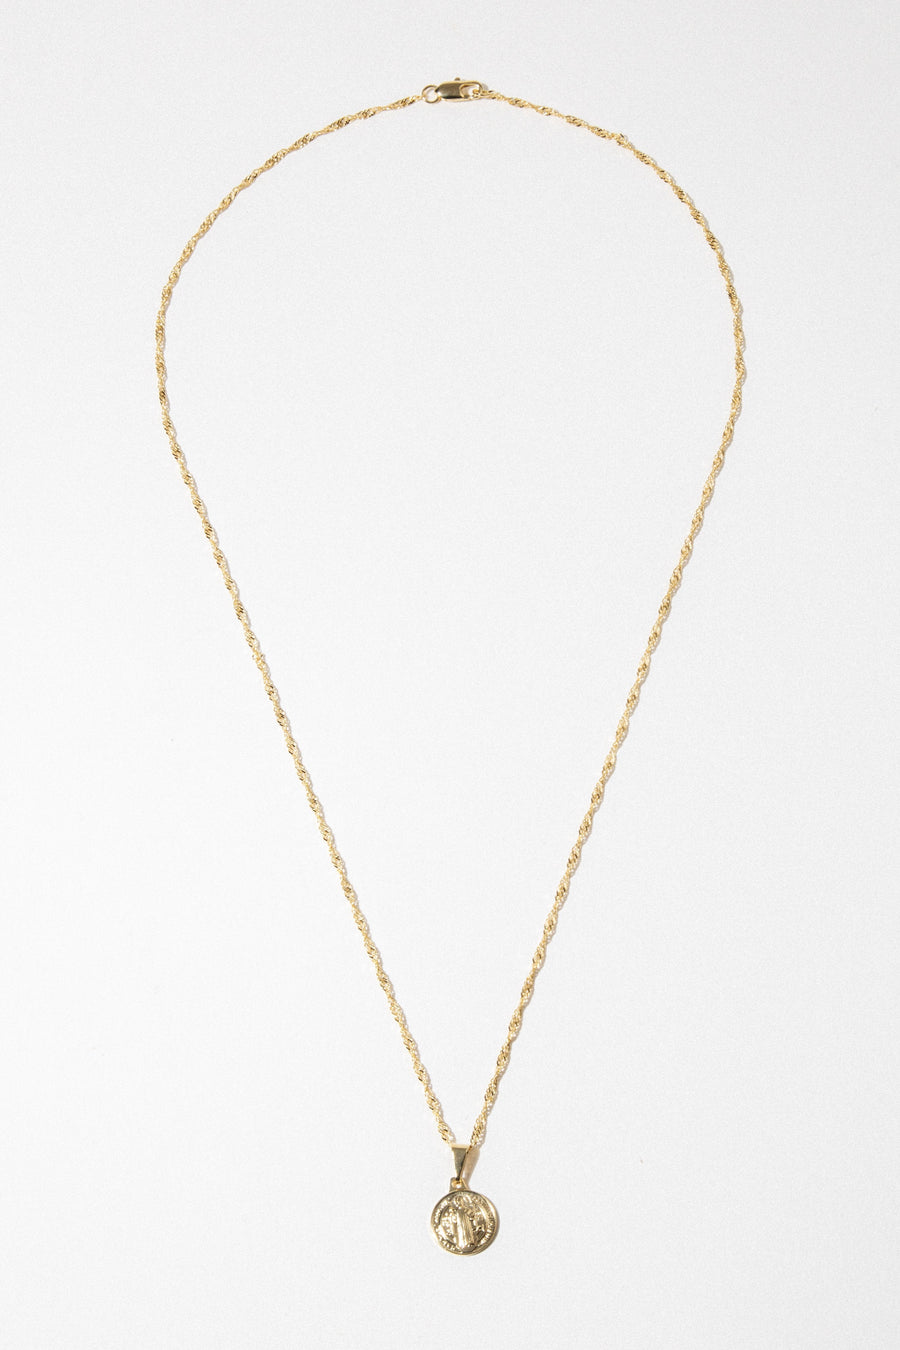 Dona Italia Jewelry Gold / 22 Inches Lil Benedict Necklace